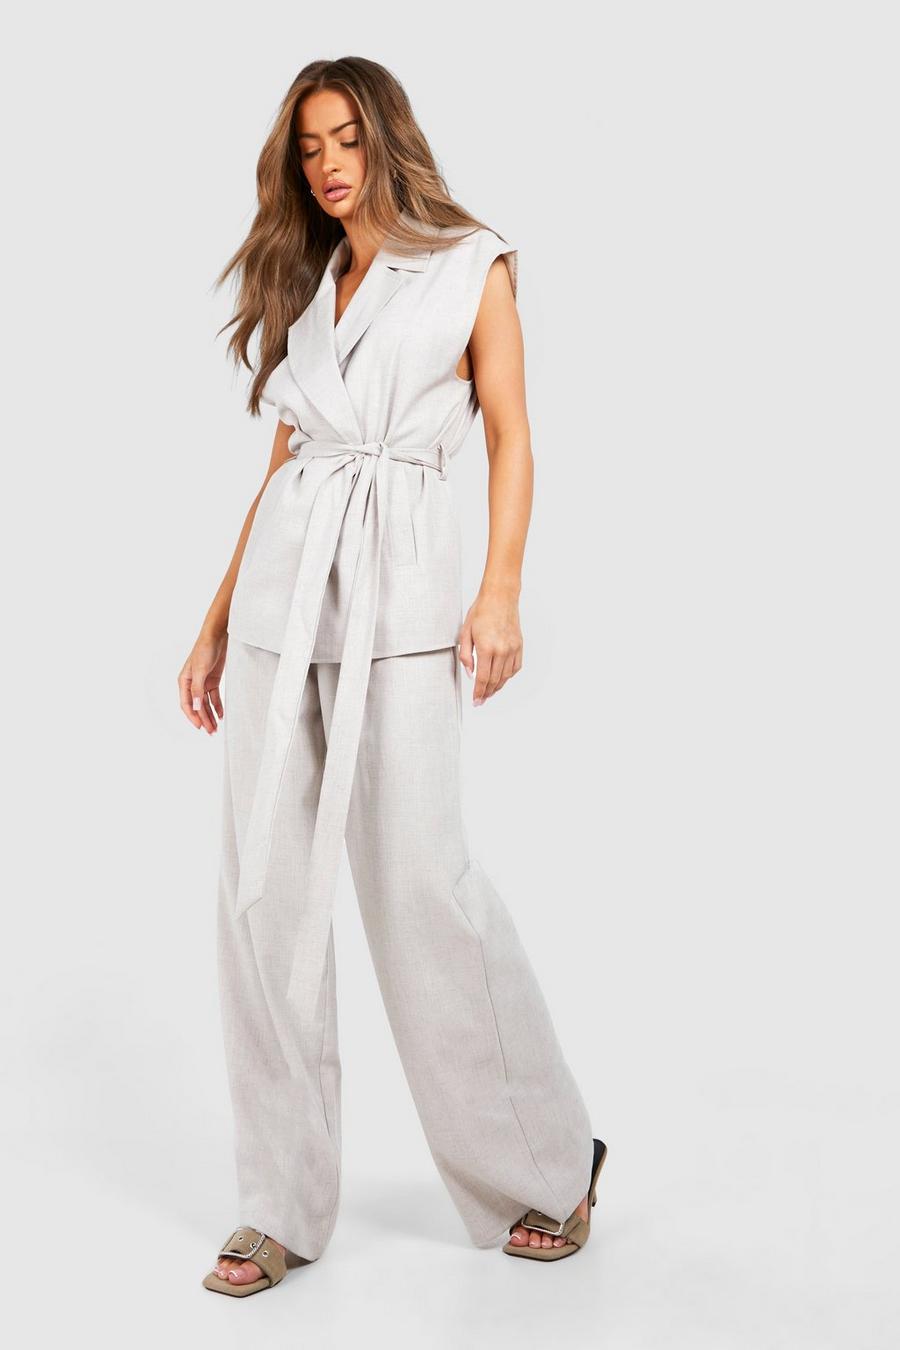 Taupe Linen Look Slouchy Wide Leg Pants